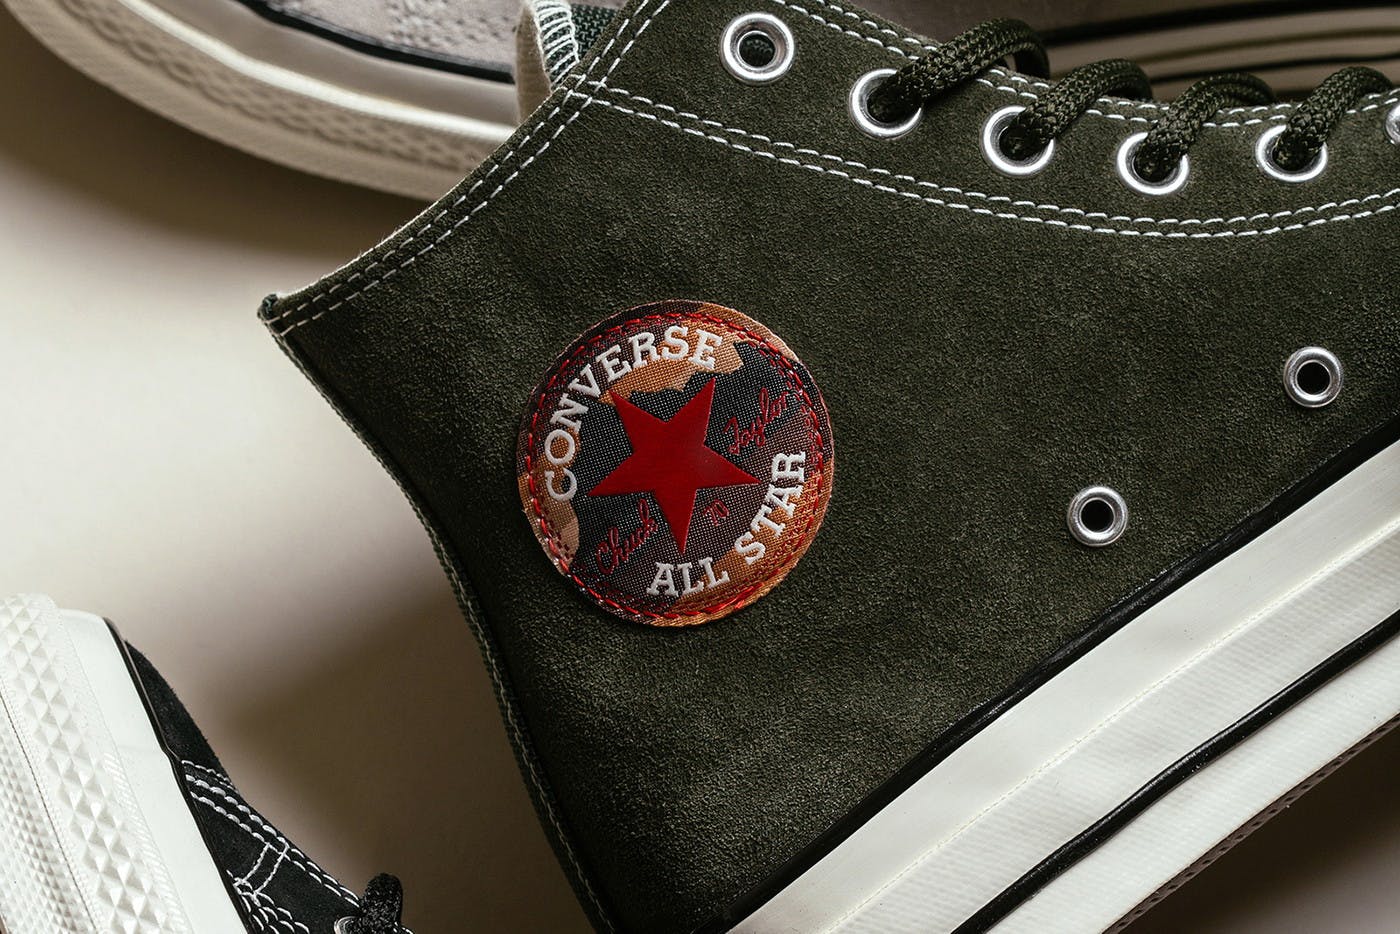 15 Converse Sales Tips and Tricks To Get All The Deals - The Krazy Coupon  Lady